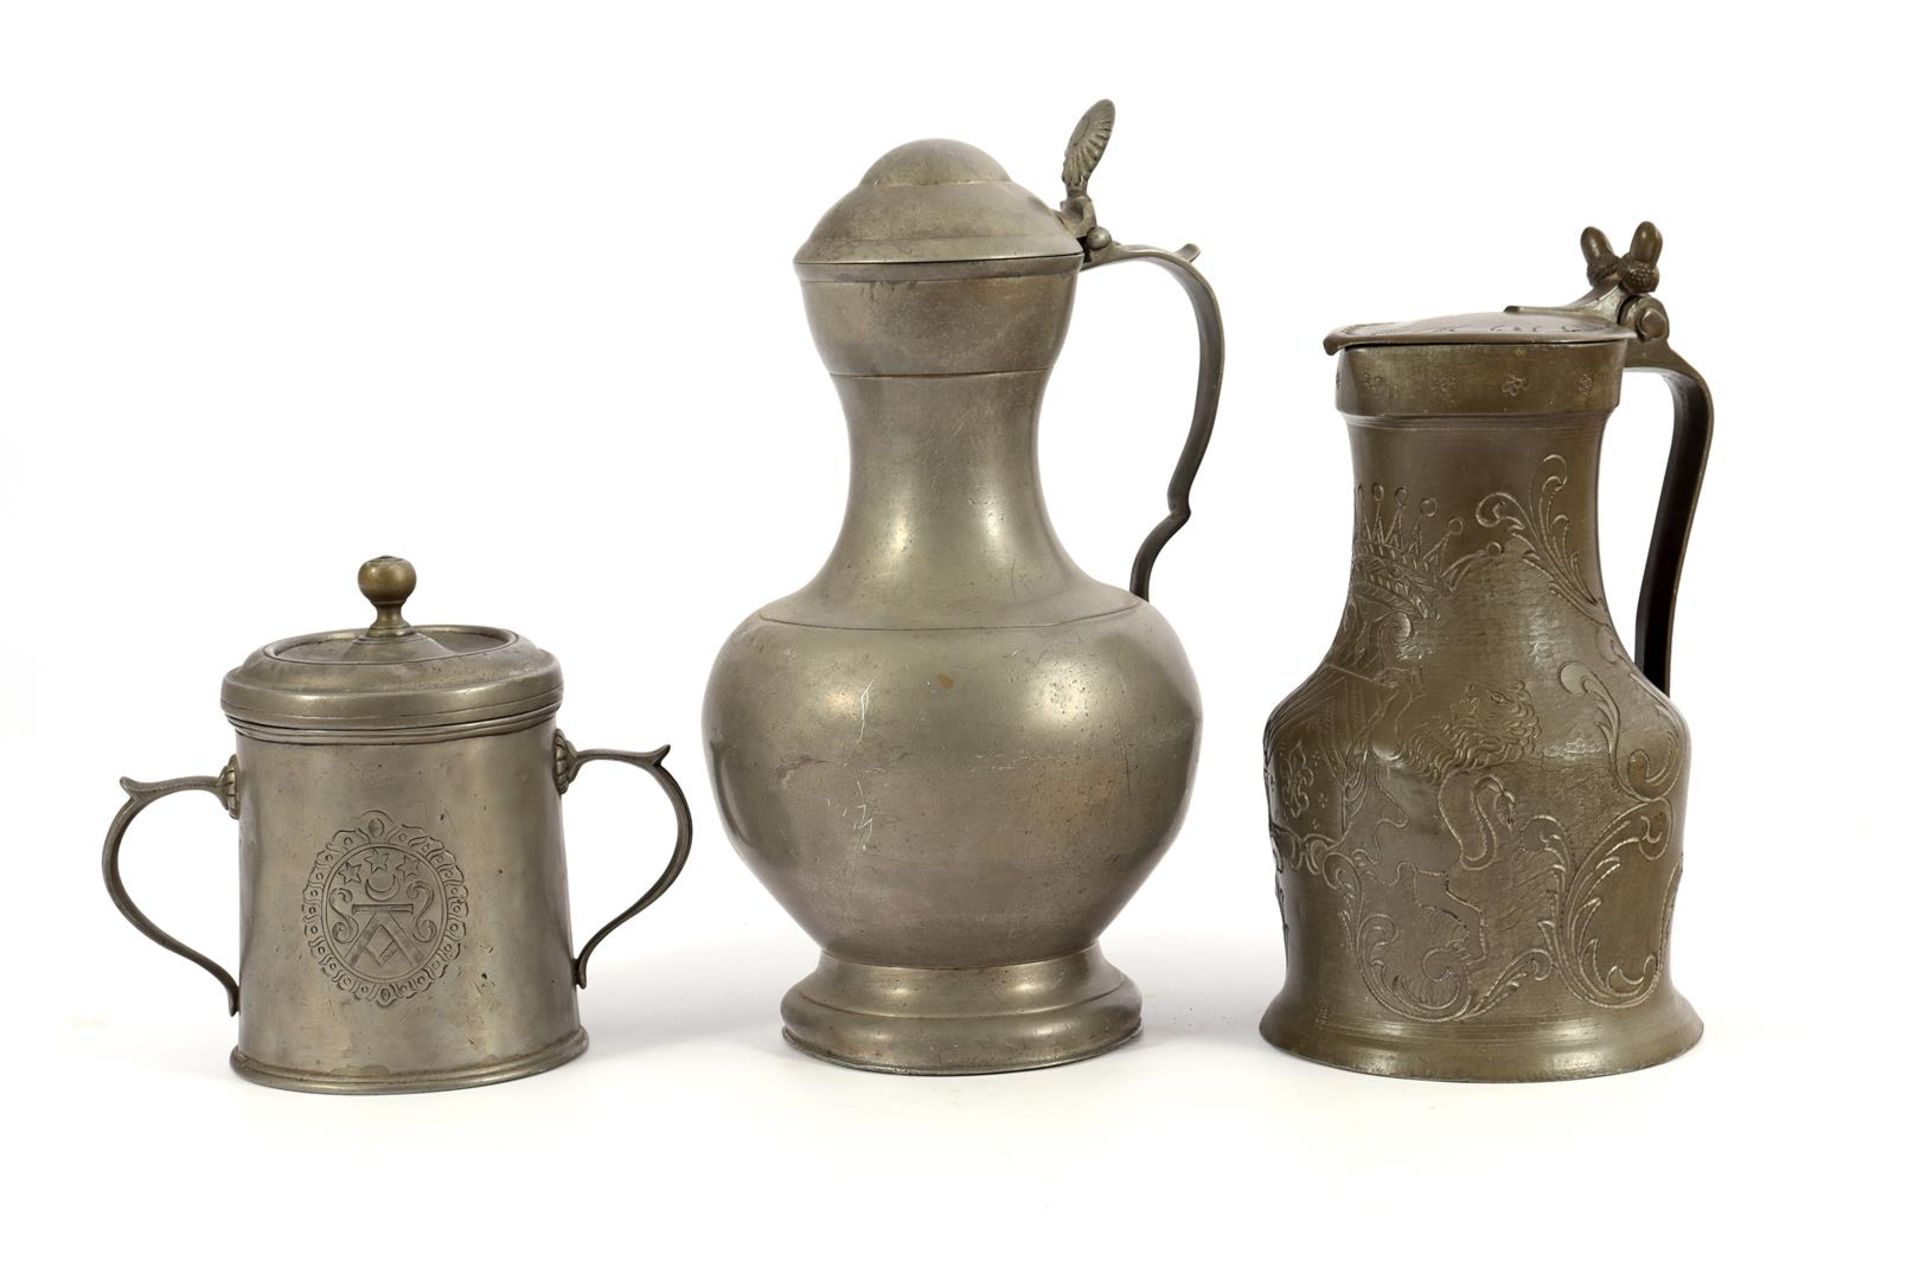 3 antique pewter jugs, incl. with engraved coat of arms